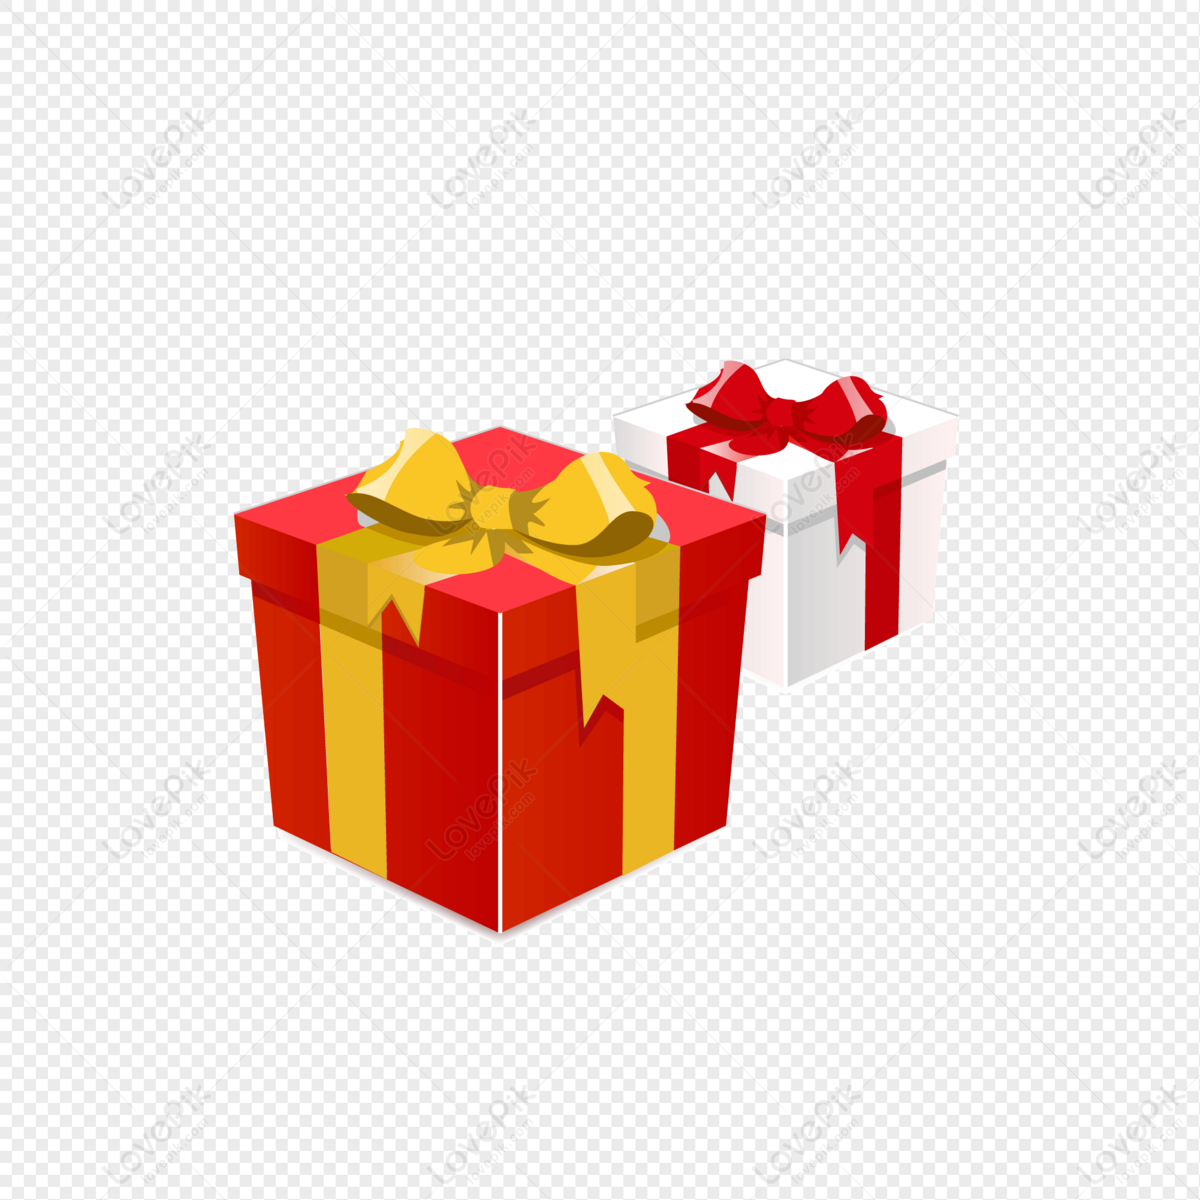 Gift Icon Free Vector Illustration Material, Material, Icon, Free Materials  PNG White Transparent And Clipart Image For Free Download - Lovepik |  401492602